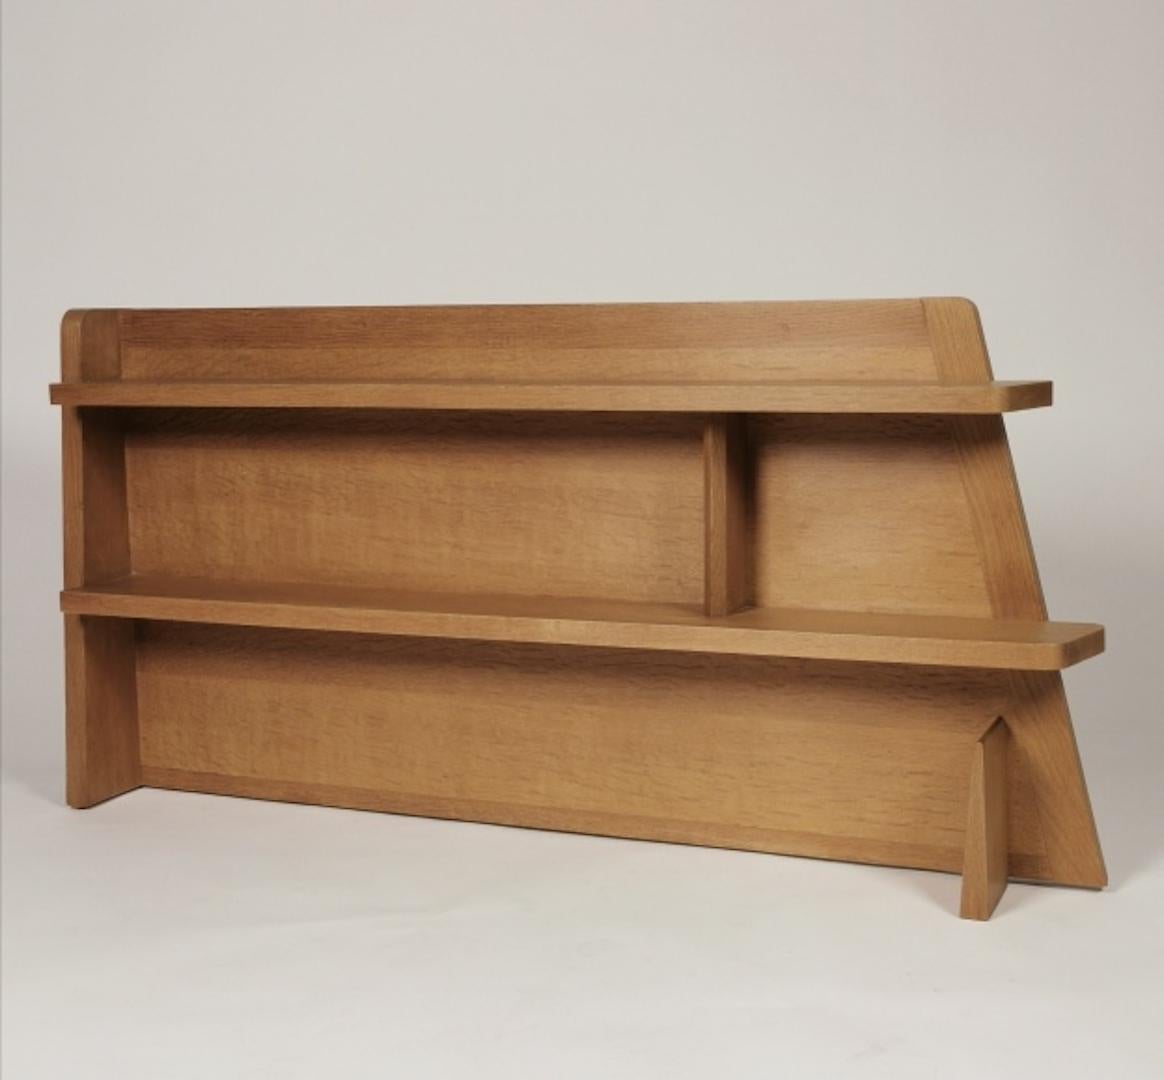 Solid oak asymmetrical wall shelf designed by Guillerme et Chambron for Votre Maison.
The shelf features typical architectural details of Guilllerme et Chambron, with a very modern approach.